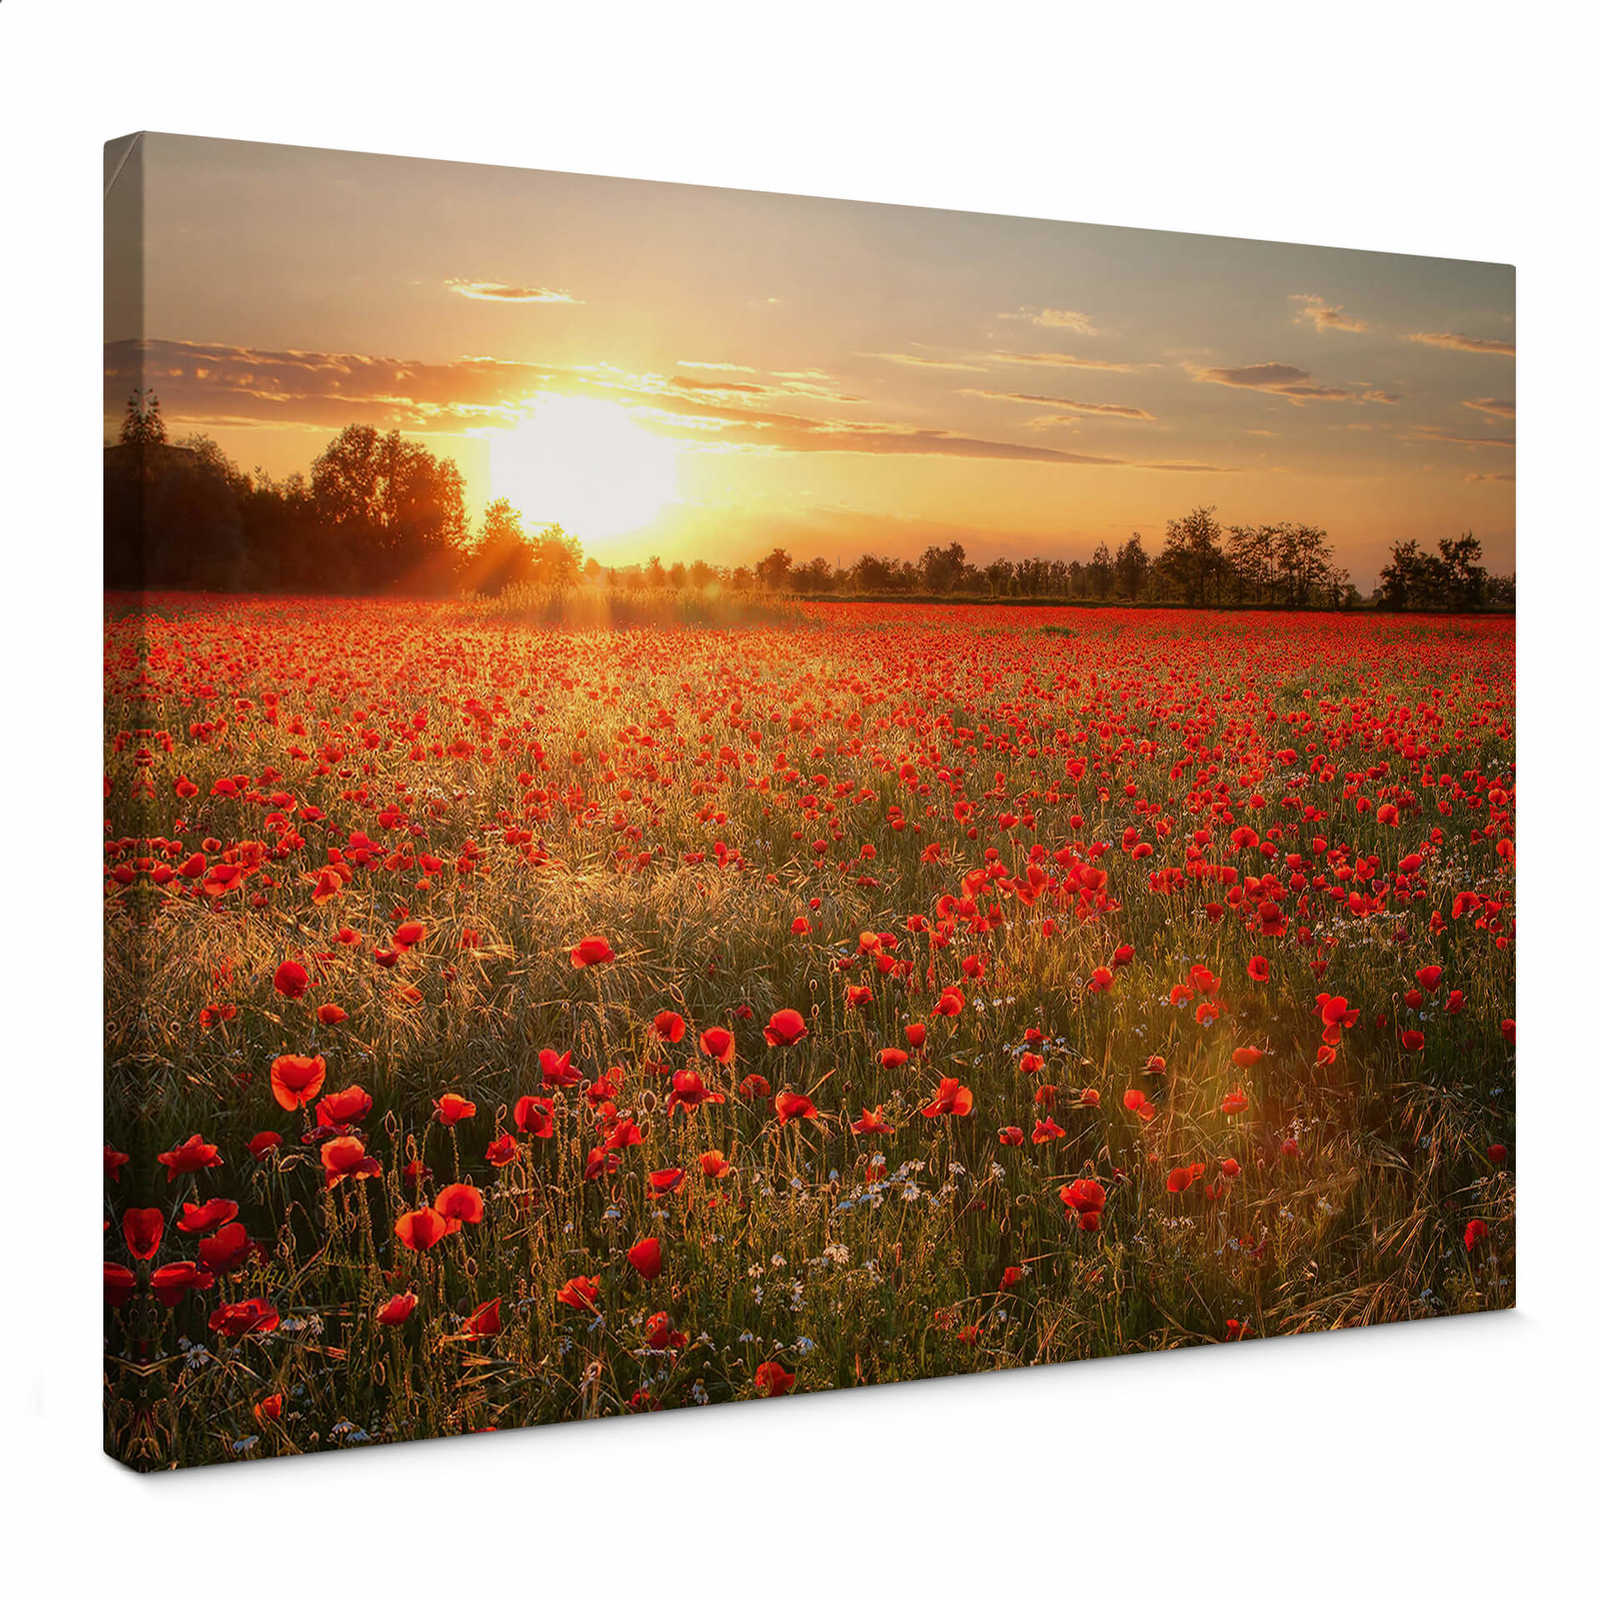         Canvas print with poppy field in the sunset
    